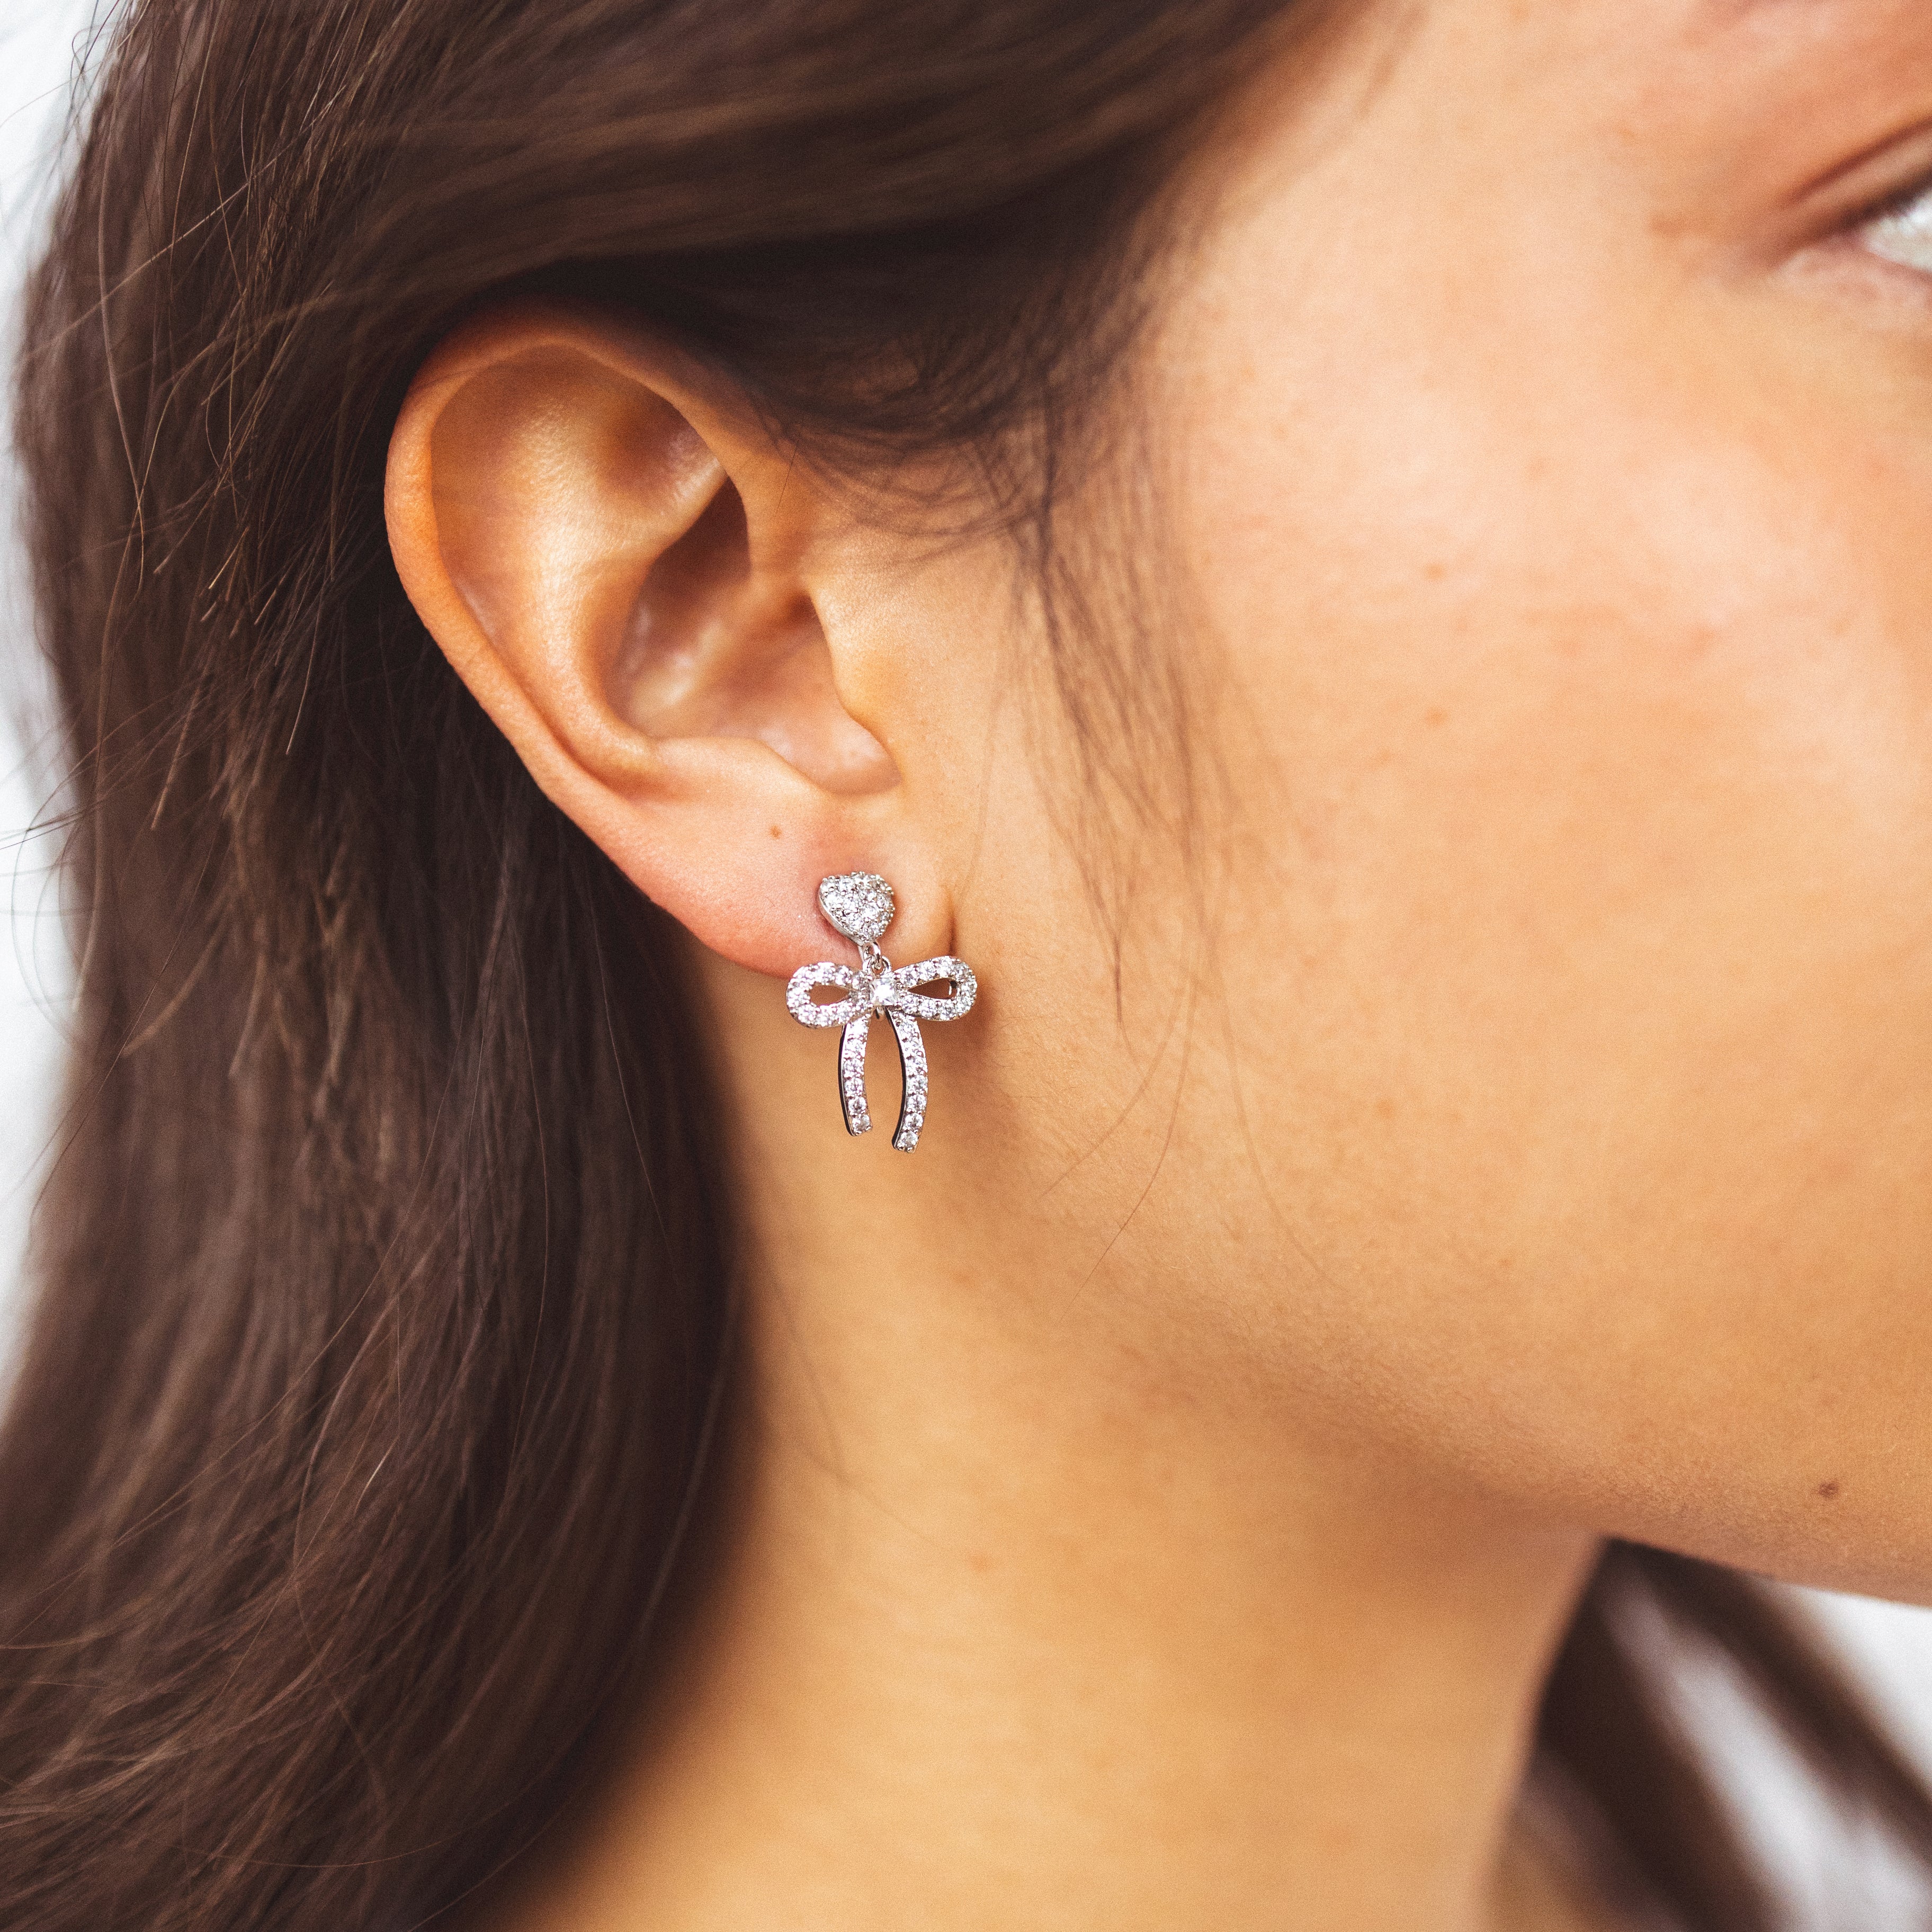 A model wearing the Lara Clip On Earrings. With a secure hold for up to 24 hours, these versatile and stylish earrings are suitable for all ear types and easily adjustable. Perfect for sensitive or stretched ears, they provide medium strength for a comfortable and hassle-free experience.